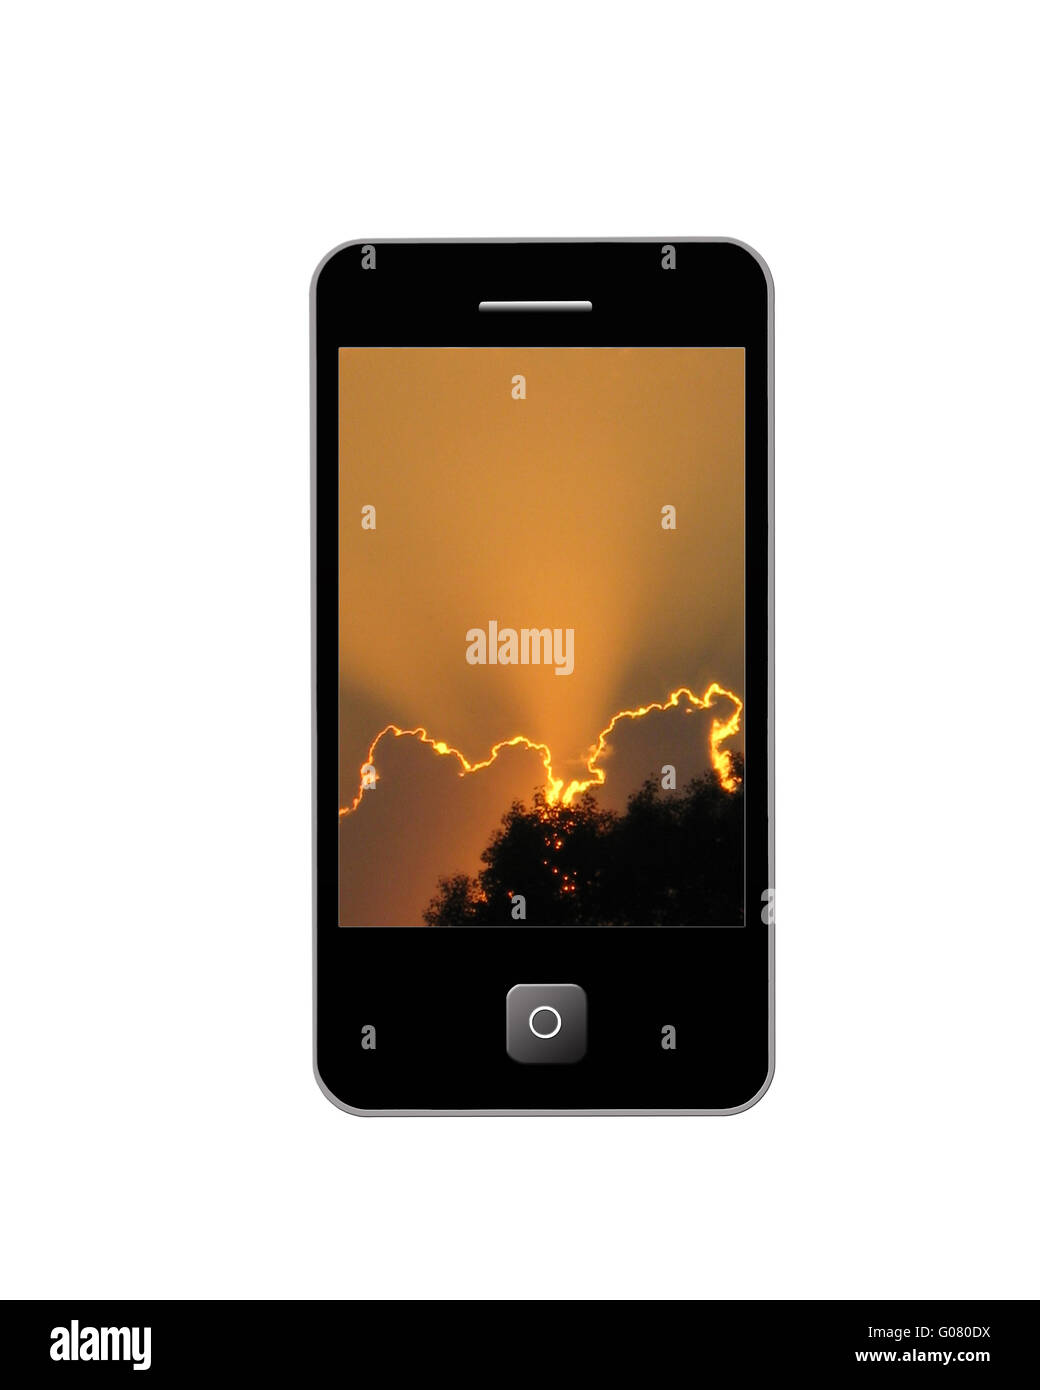 modern phone with image of sunset Stock Photo